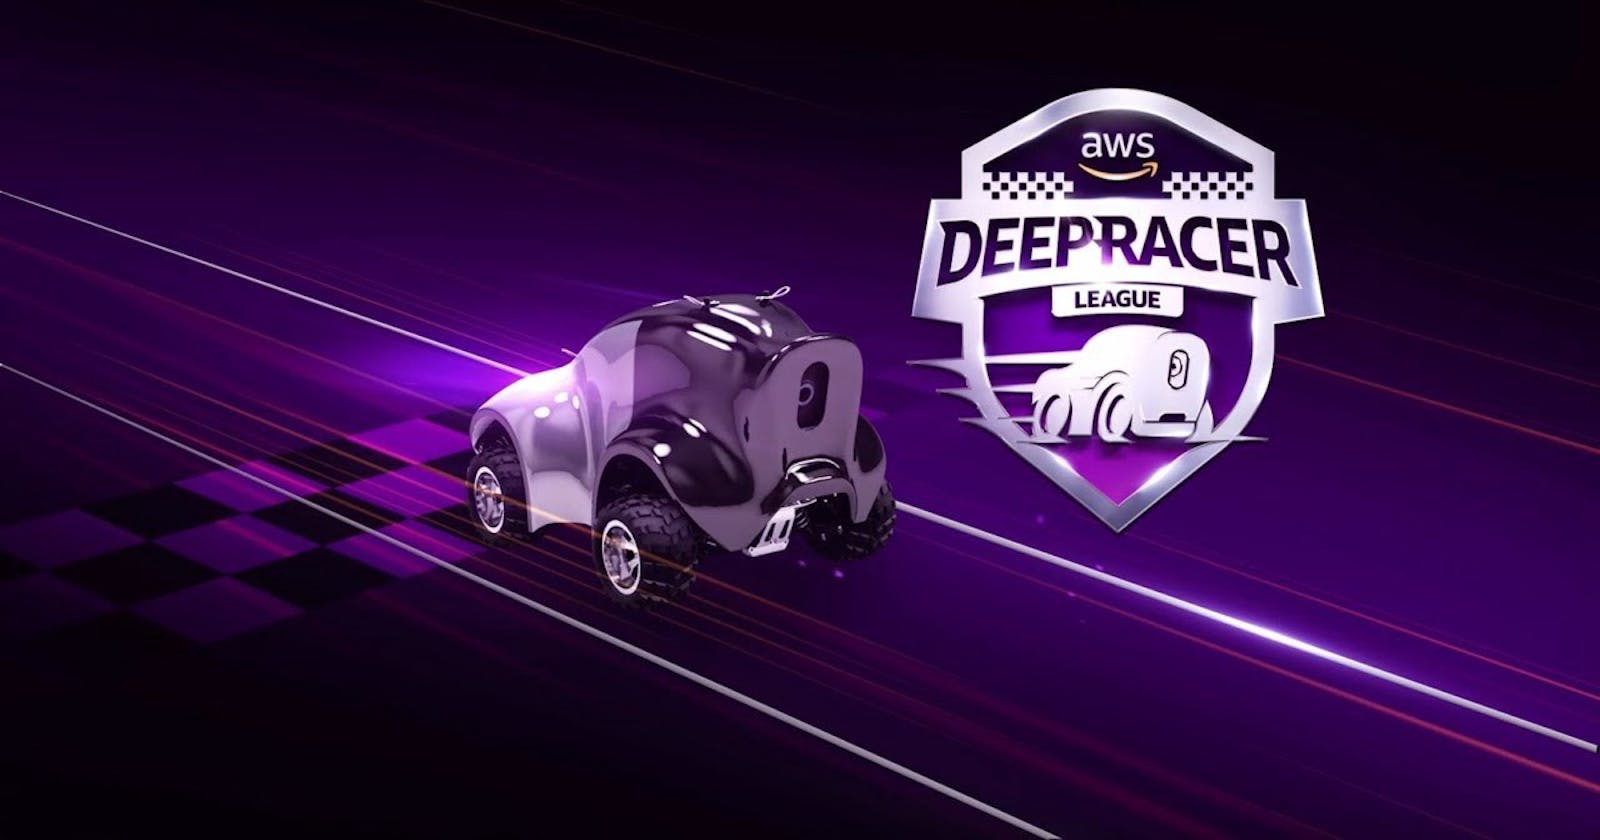 On a Long Drive with AWS DeepRacer